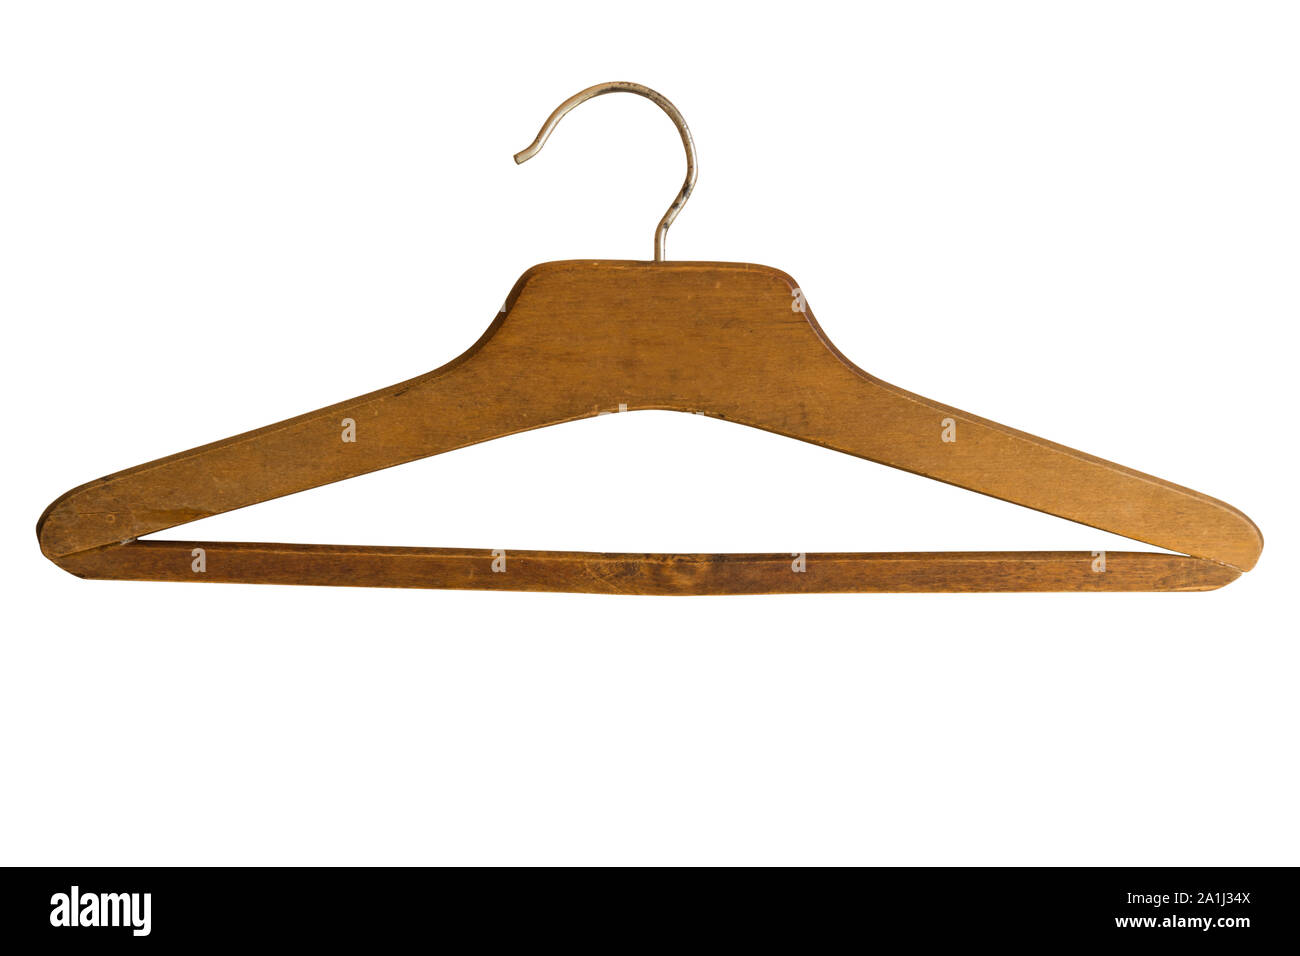 Wooden vintage clothing hanger isolated on white background. Equipment for wardrobe. Stock Photo